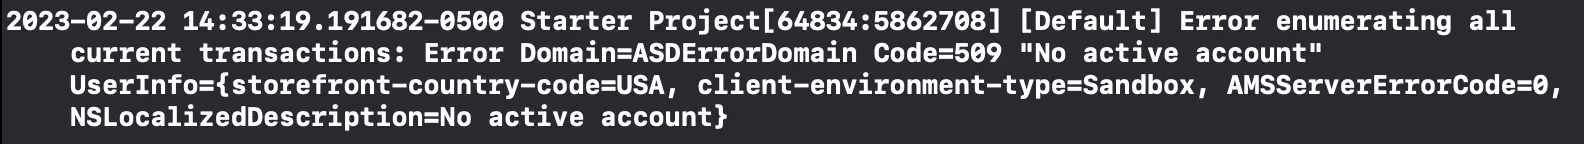 2023-02-22 14:33:19.191682-0500 Starter Project[64834:5862708] [Default] Error enumerating all current transactions: Error Domain=ASDErrorDomain Code=509 "No active account" UserInfo={storefront-country-code=USA, client-environment-type=Sandbox, AMSServerErrorCode=0, NSLocalizedDescription=No active account}